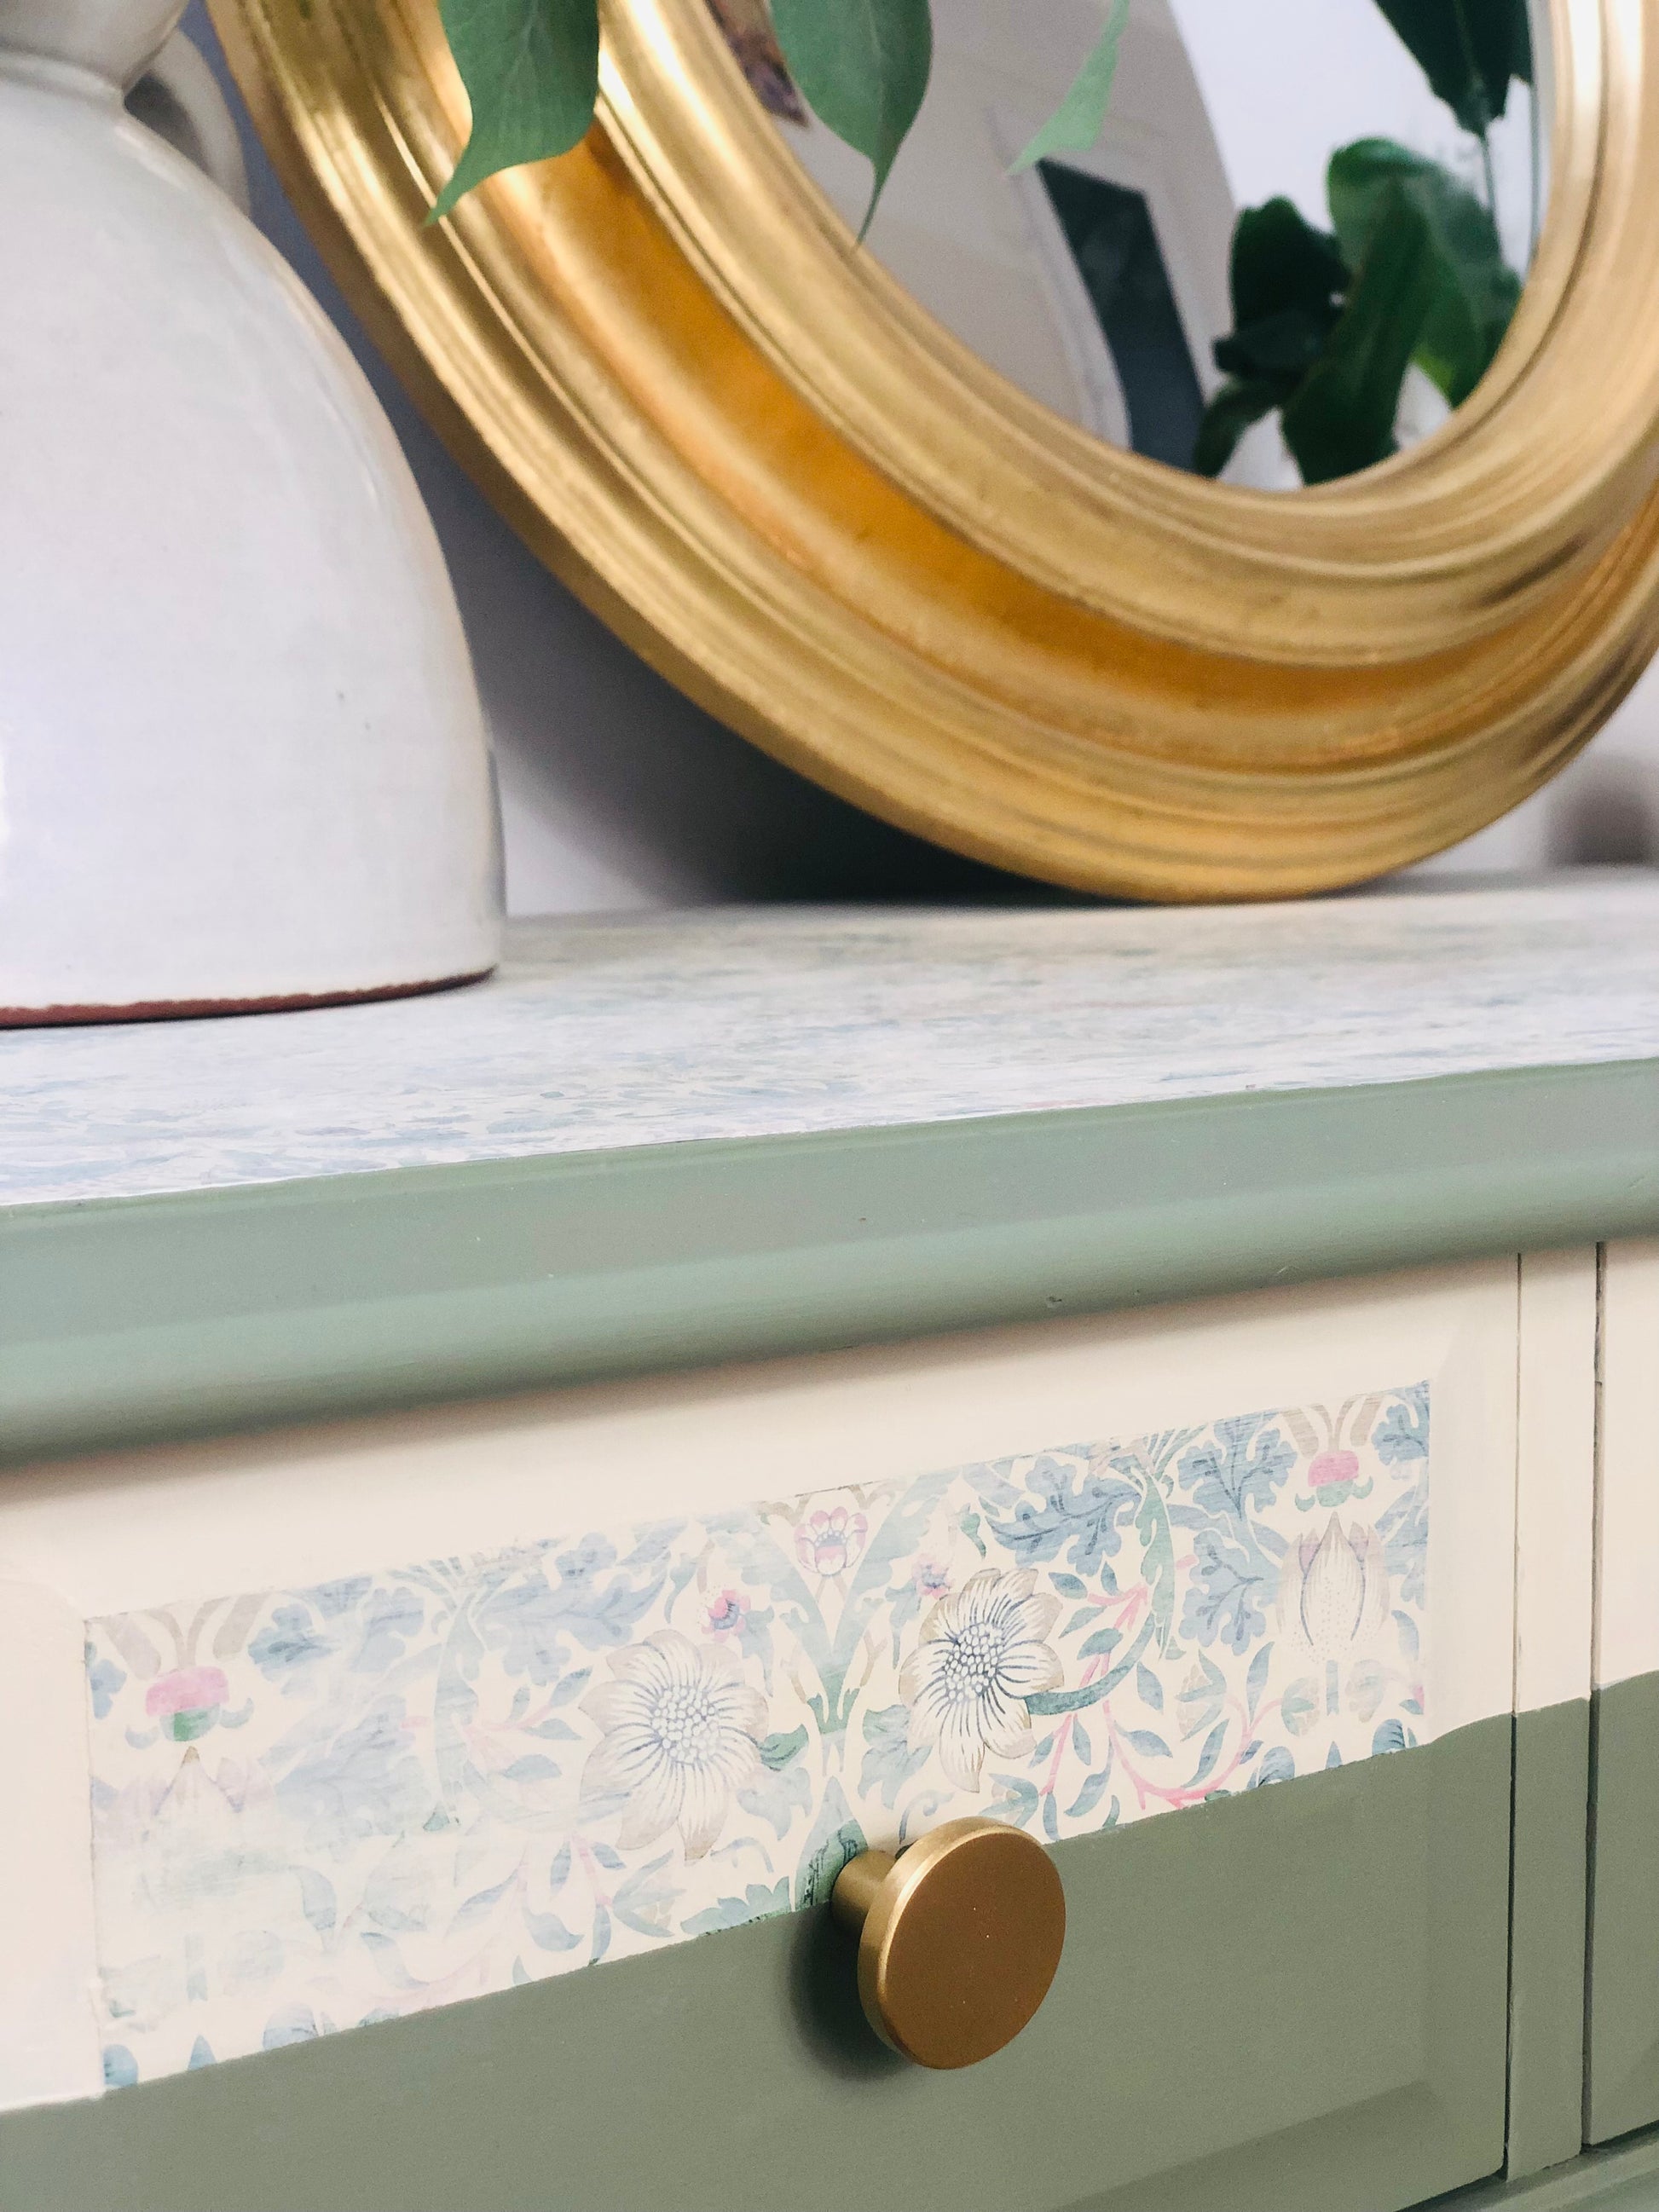 Stag Minstrel console table, painted in green with William Morris Strawberry theif paper detail and gold knobs